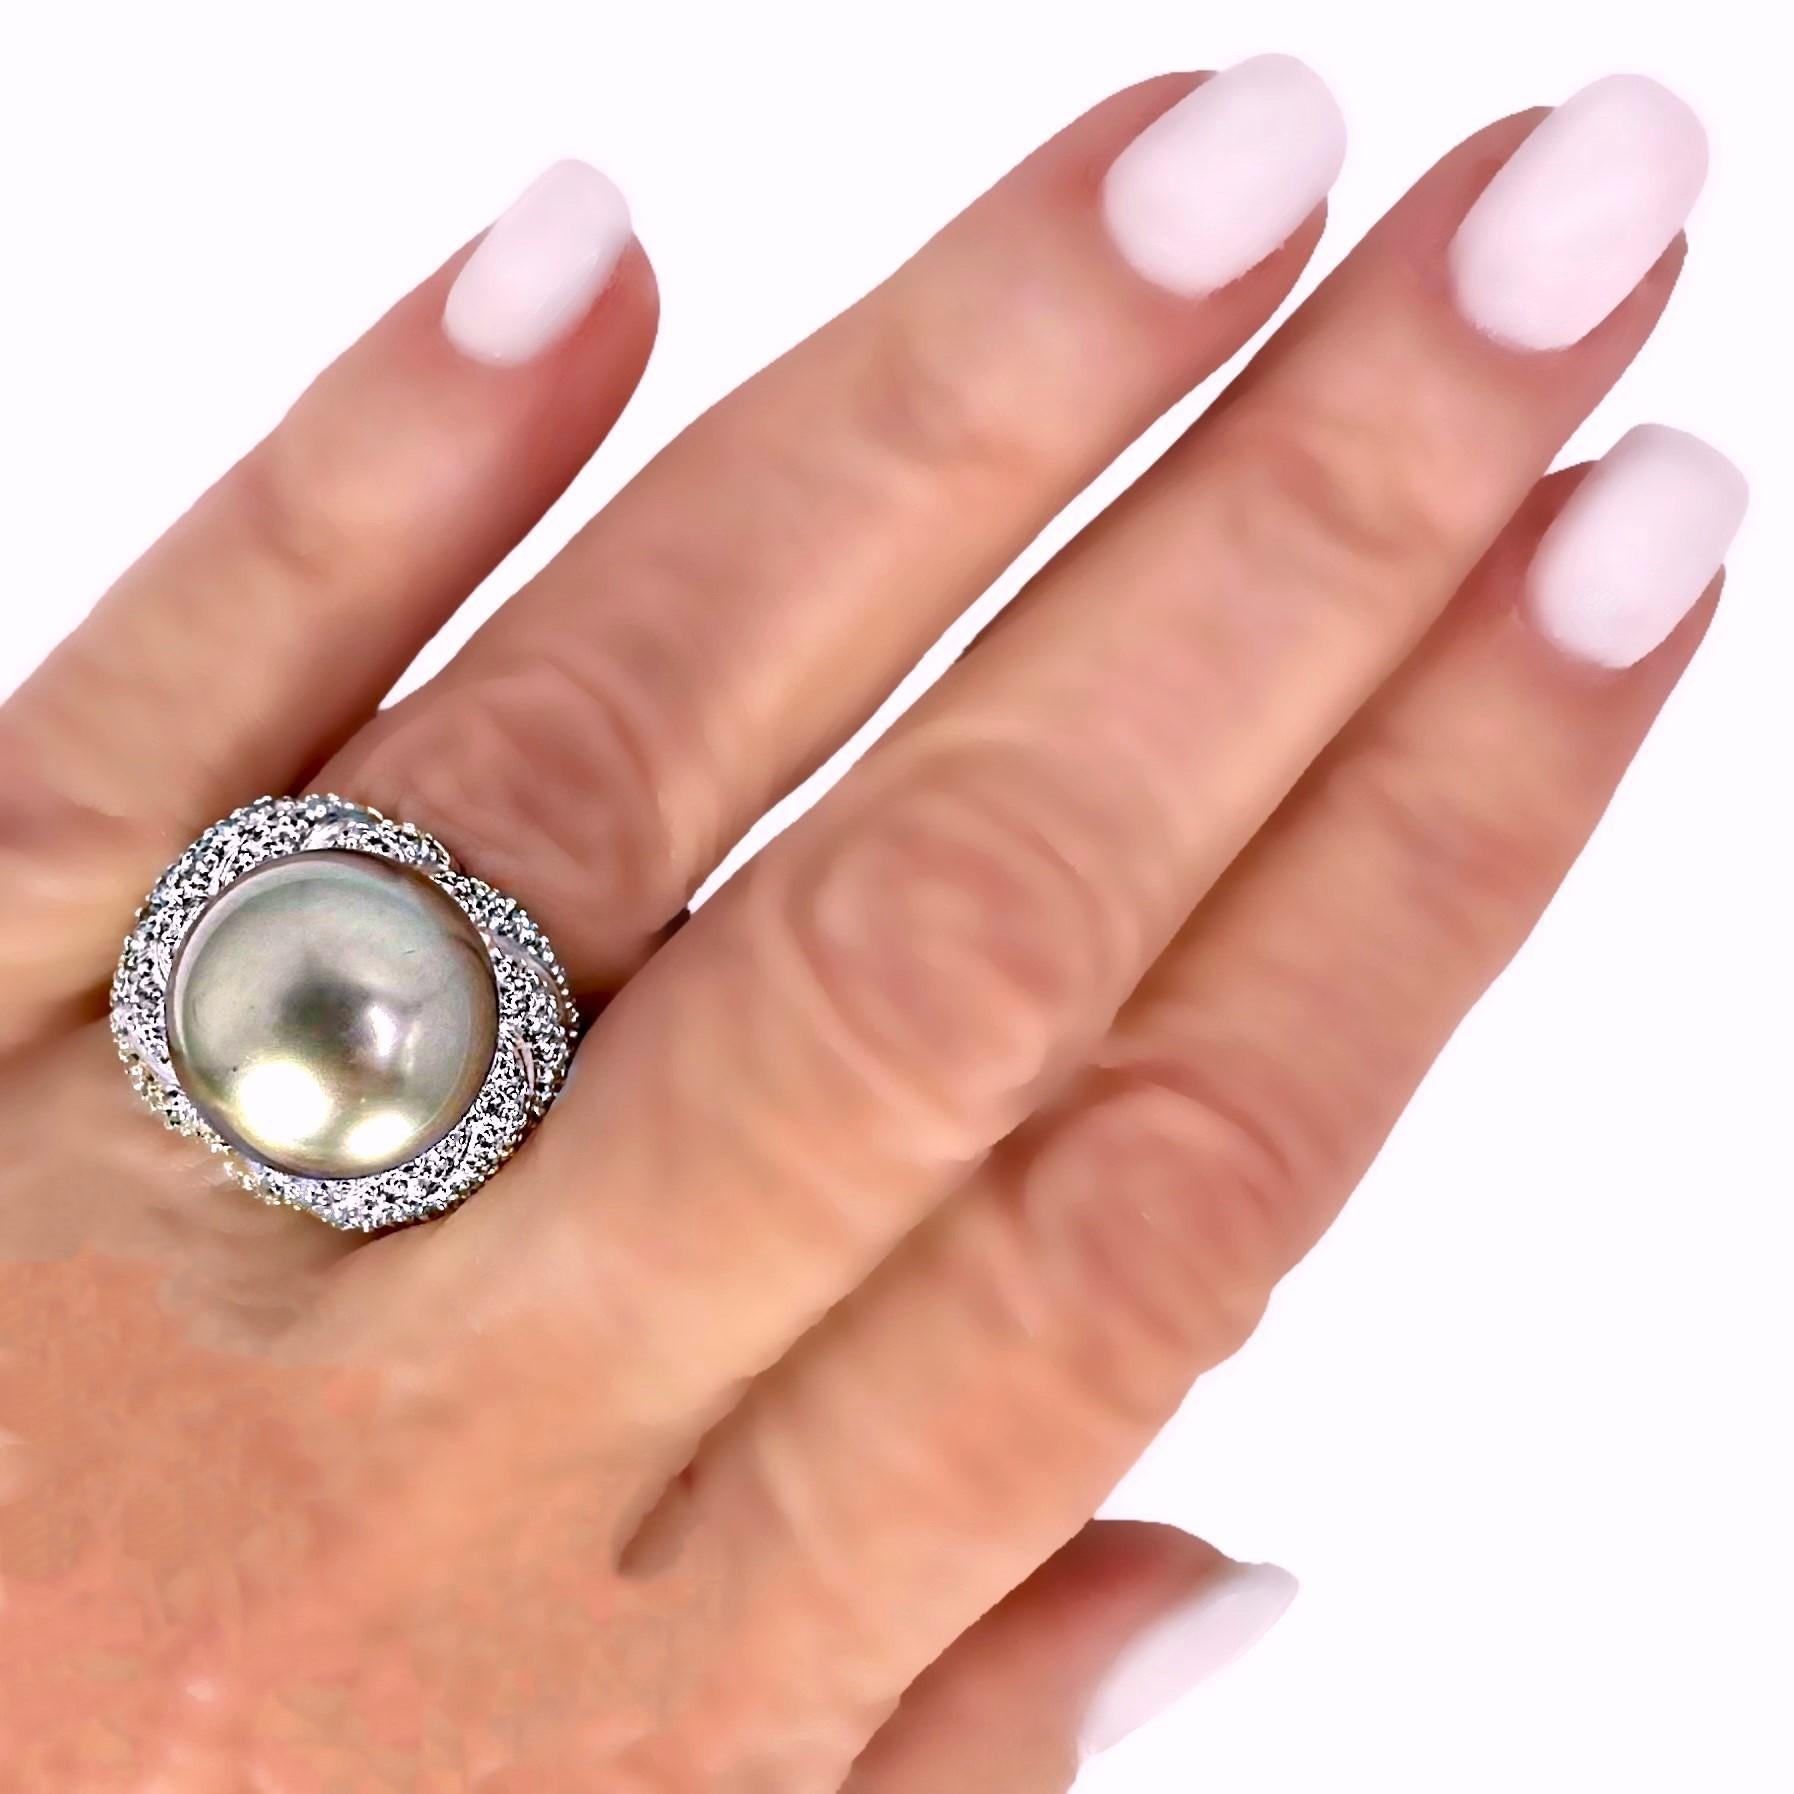 Late 20th Century 18k White Gold, Diamond & Gray Tahitian Pearl Cocktail Ring For Sale 7